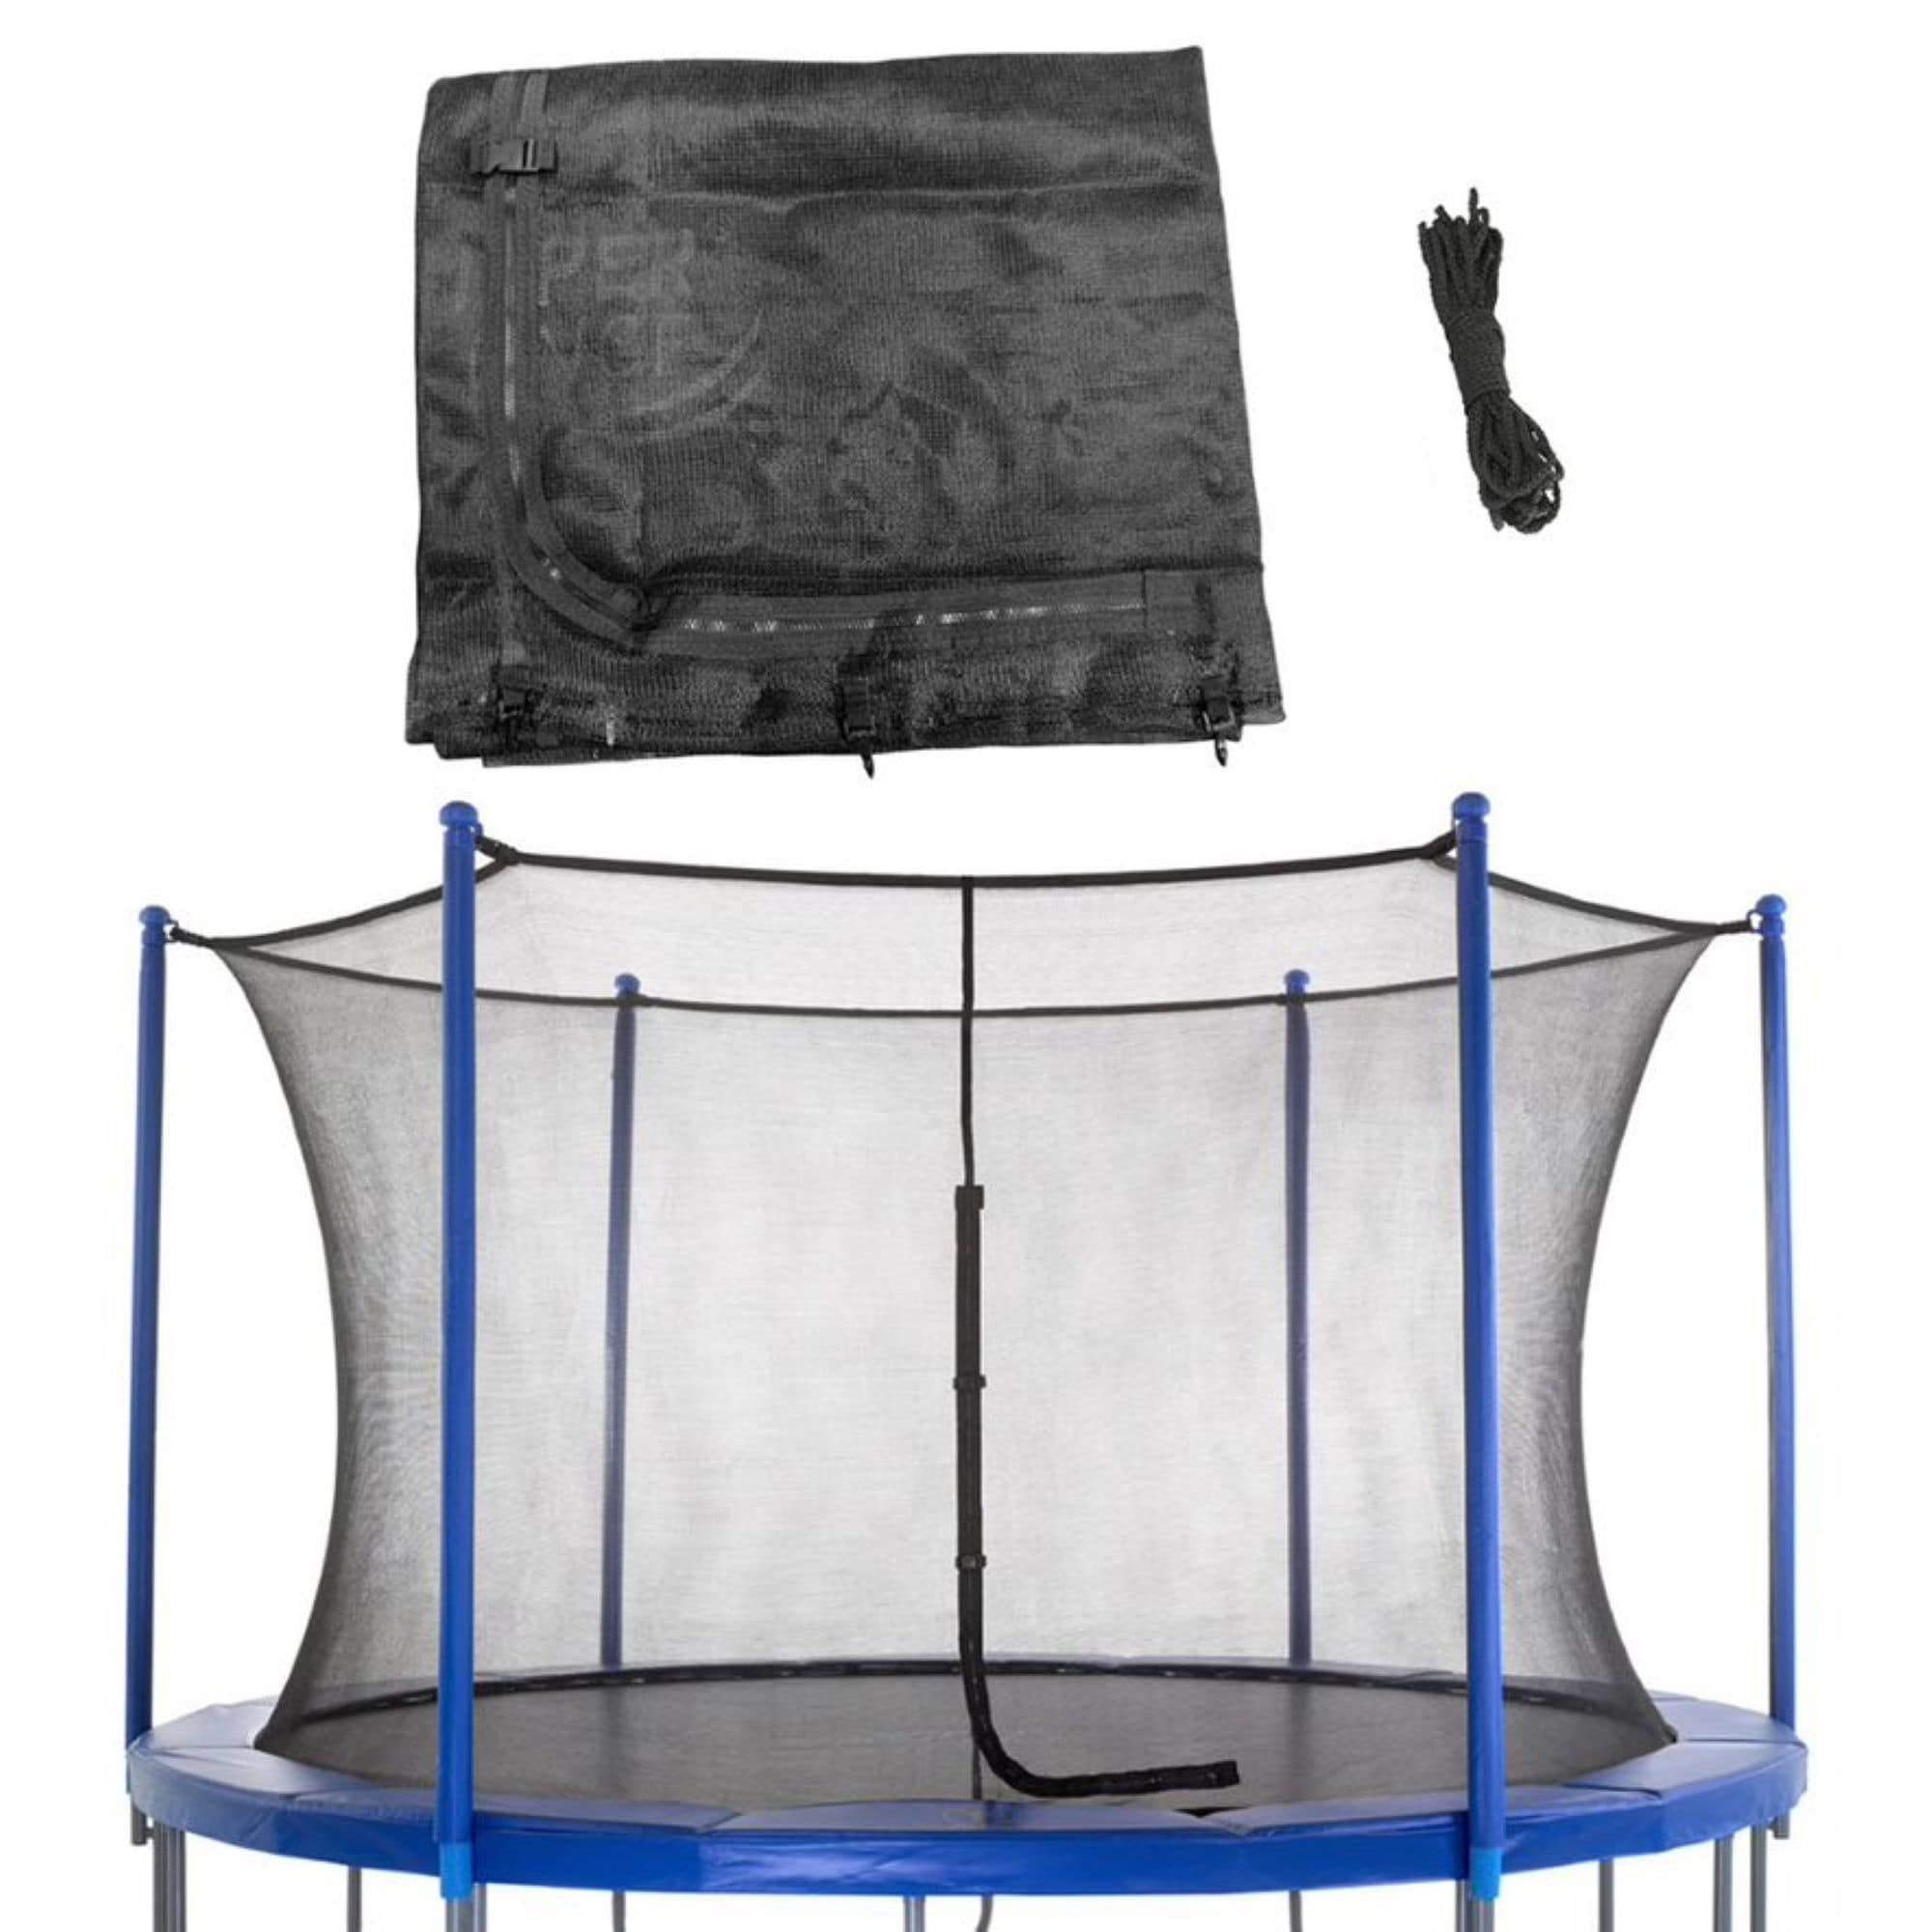 UpperBounce Net Black Safety Enclosure the Trampoline Accessories department Lowes.com